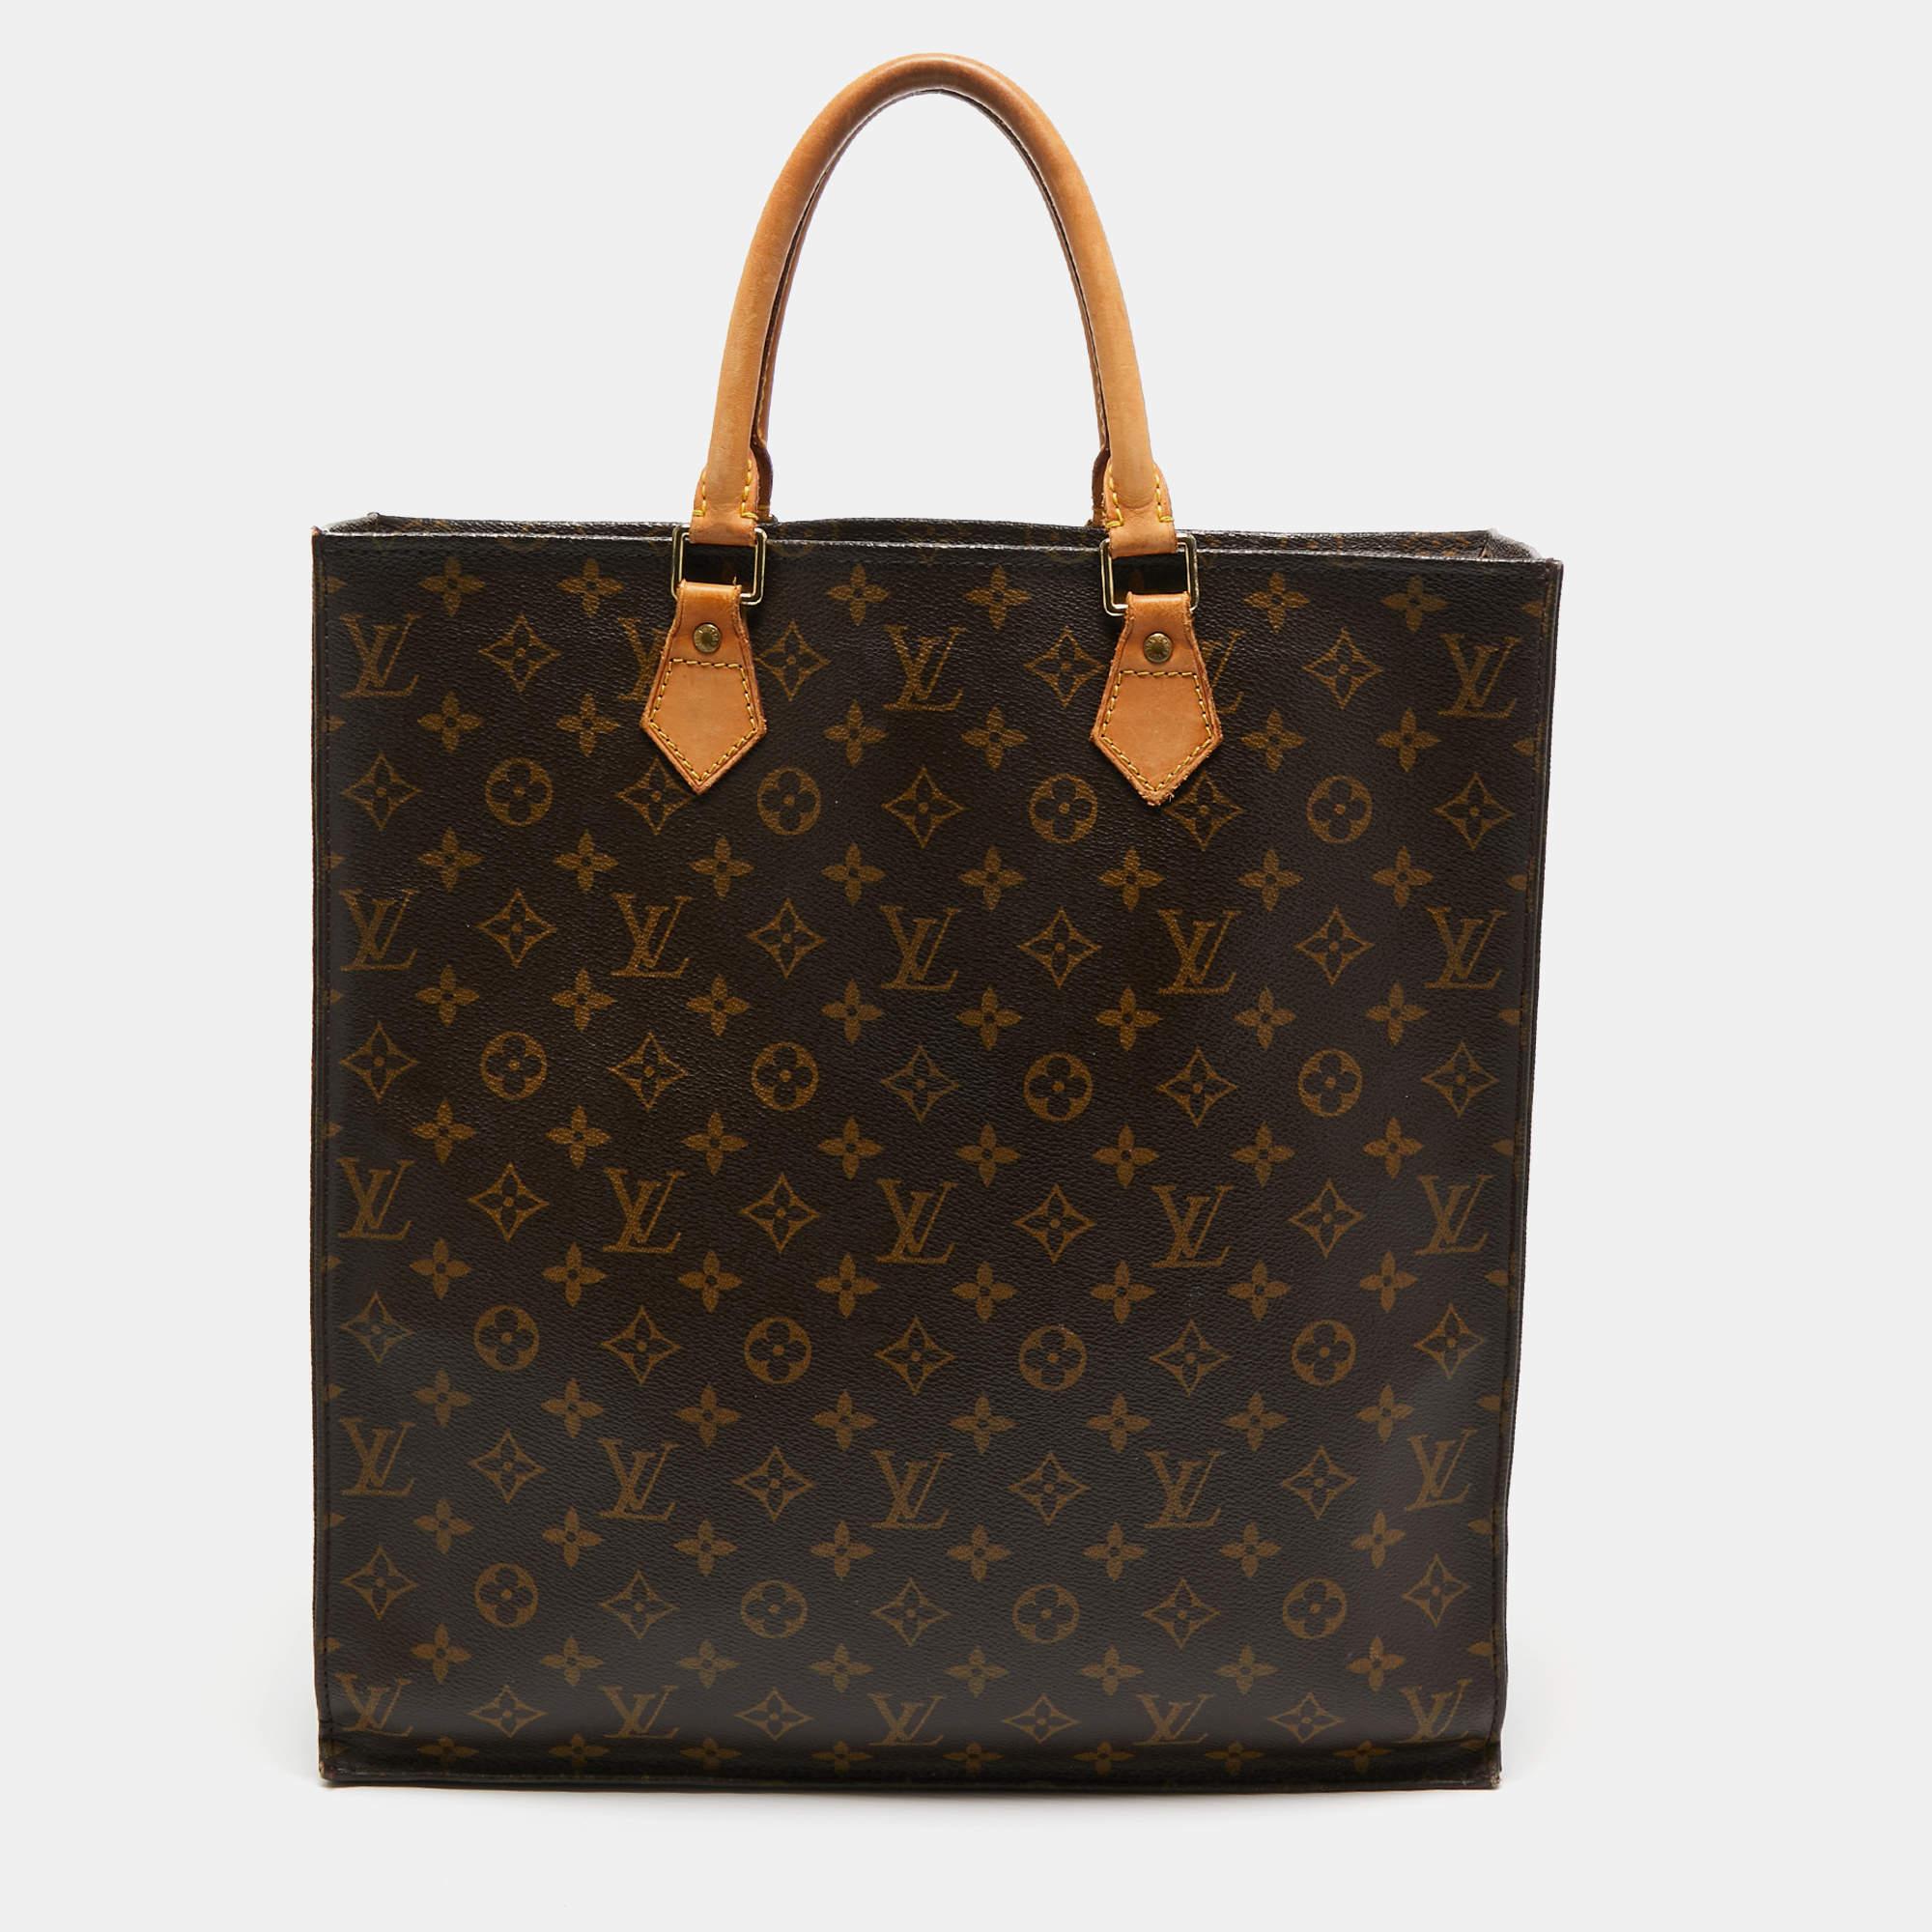 Now you can go to work in style with this Louis Vuitton Plat GM bag. Crafted from canvas, this bag features the iconic monogram spread, an open top and two rolled handles for easy carriage. The interior is leather-lined and spacious enough to carry